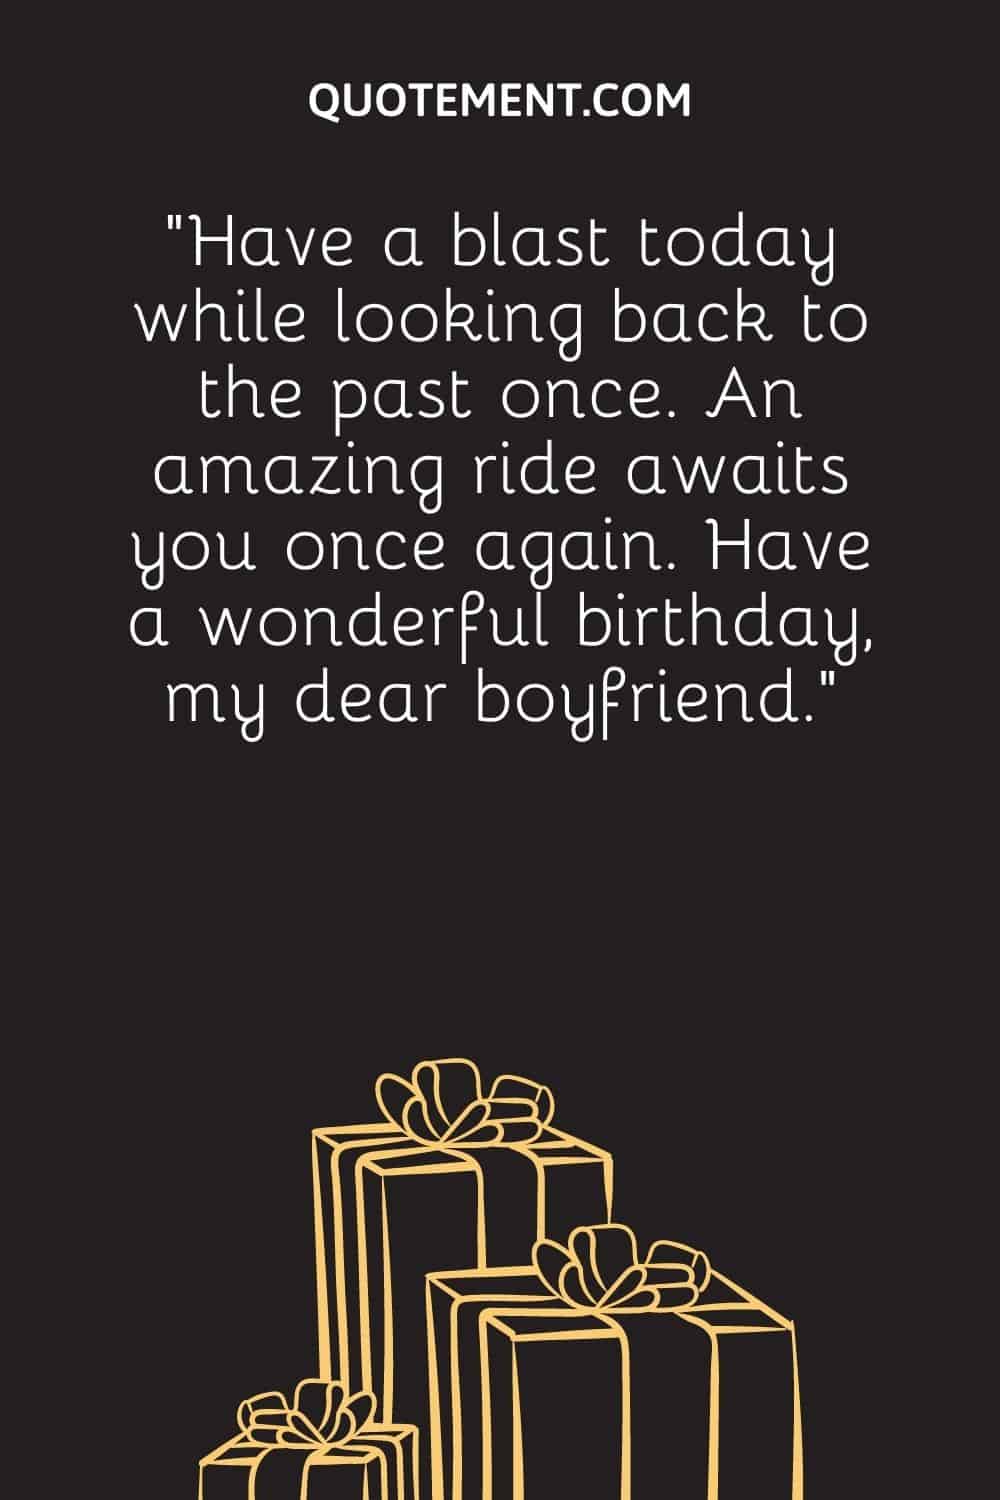 “Have a blast today while looking back to the past once. An amazing ride awaits you once again. Have a wonderful birthday, my dear boyfriend.”